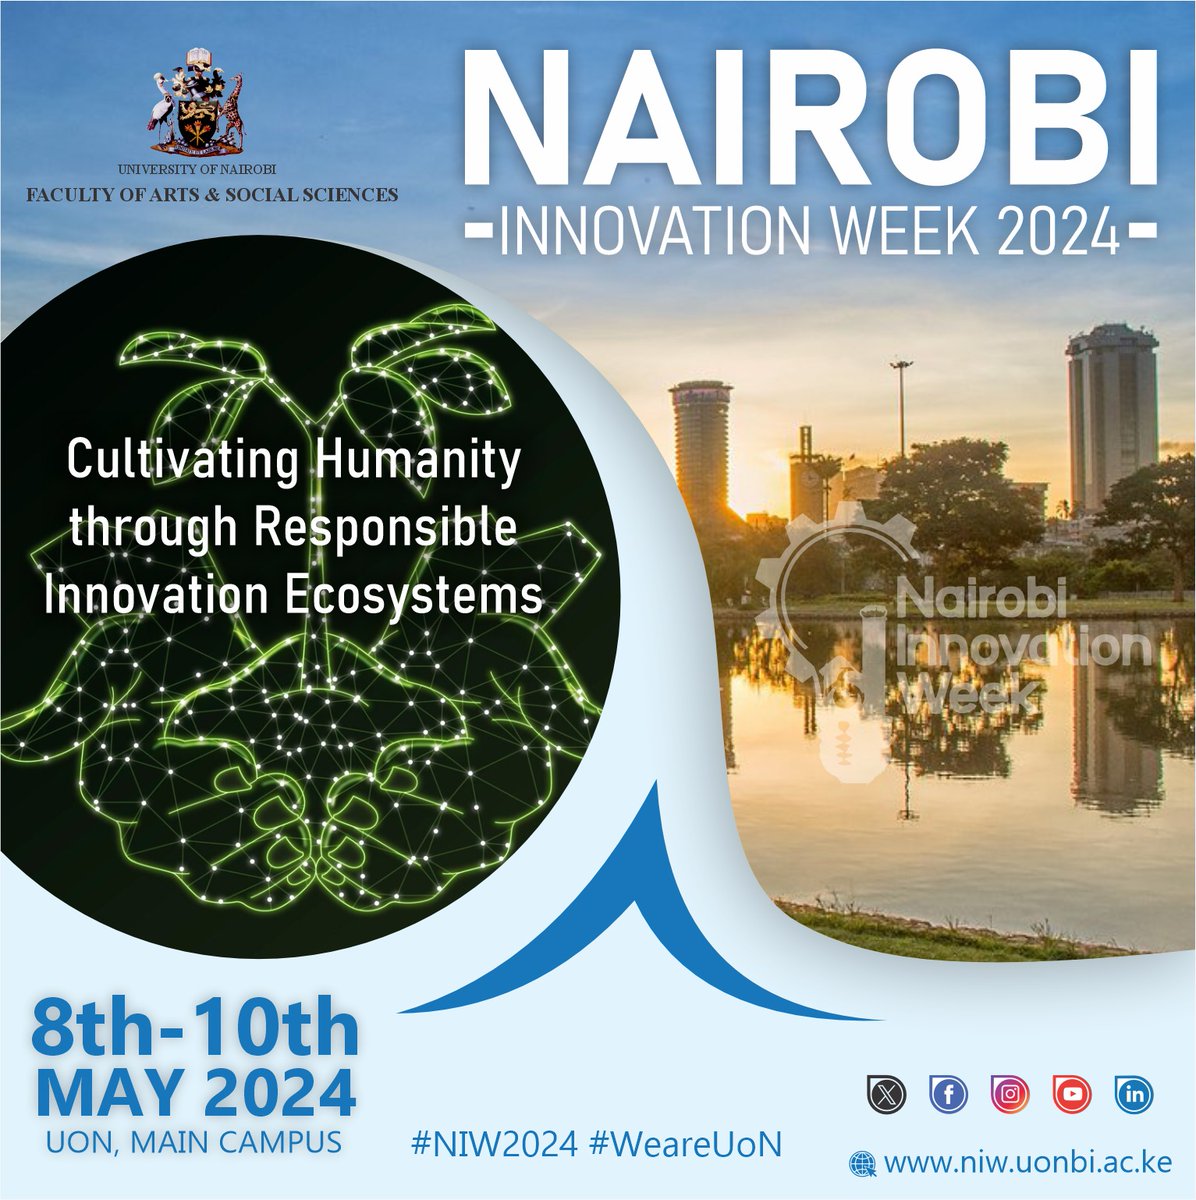 Join us at Taifa Hall for the closing session of the 8th edition of Nairobi Innovation Week, where the Faculty of Arts and Social Sciences will be exploring the path forward in nurturing humanity through sustainable ecosystems.'#NIW2024 @InnovationNIW